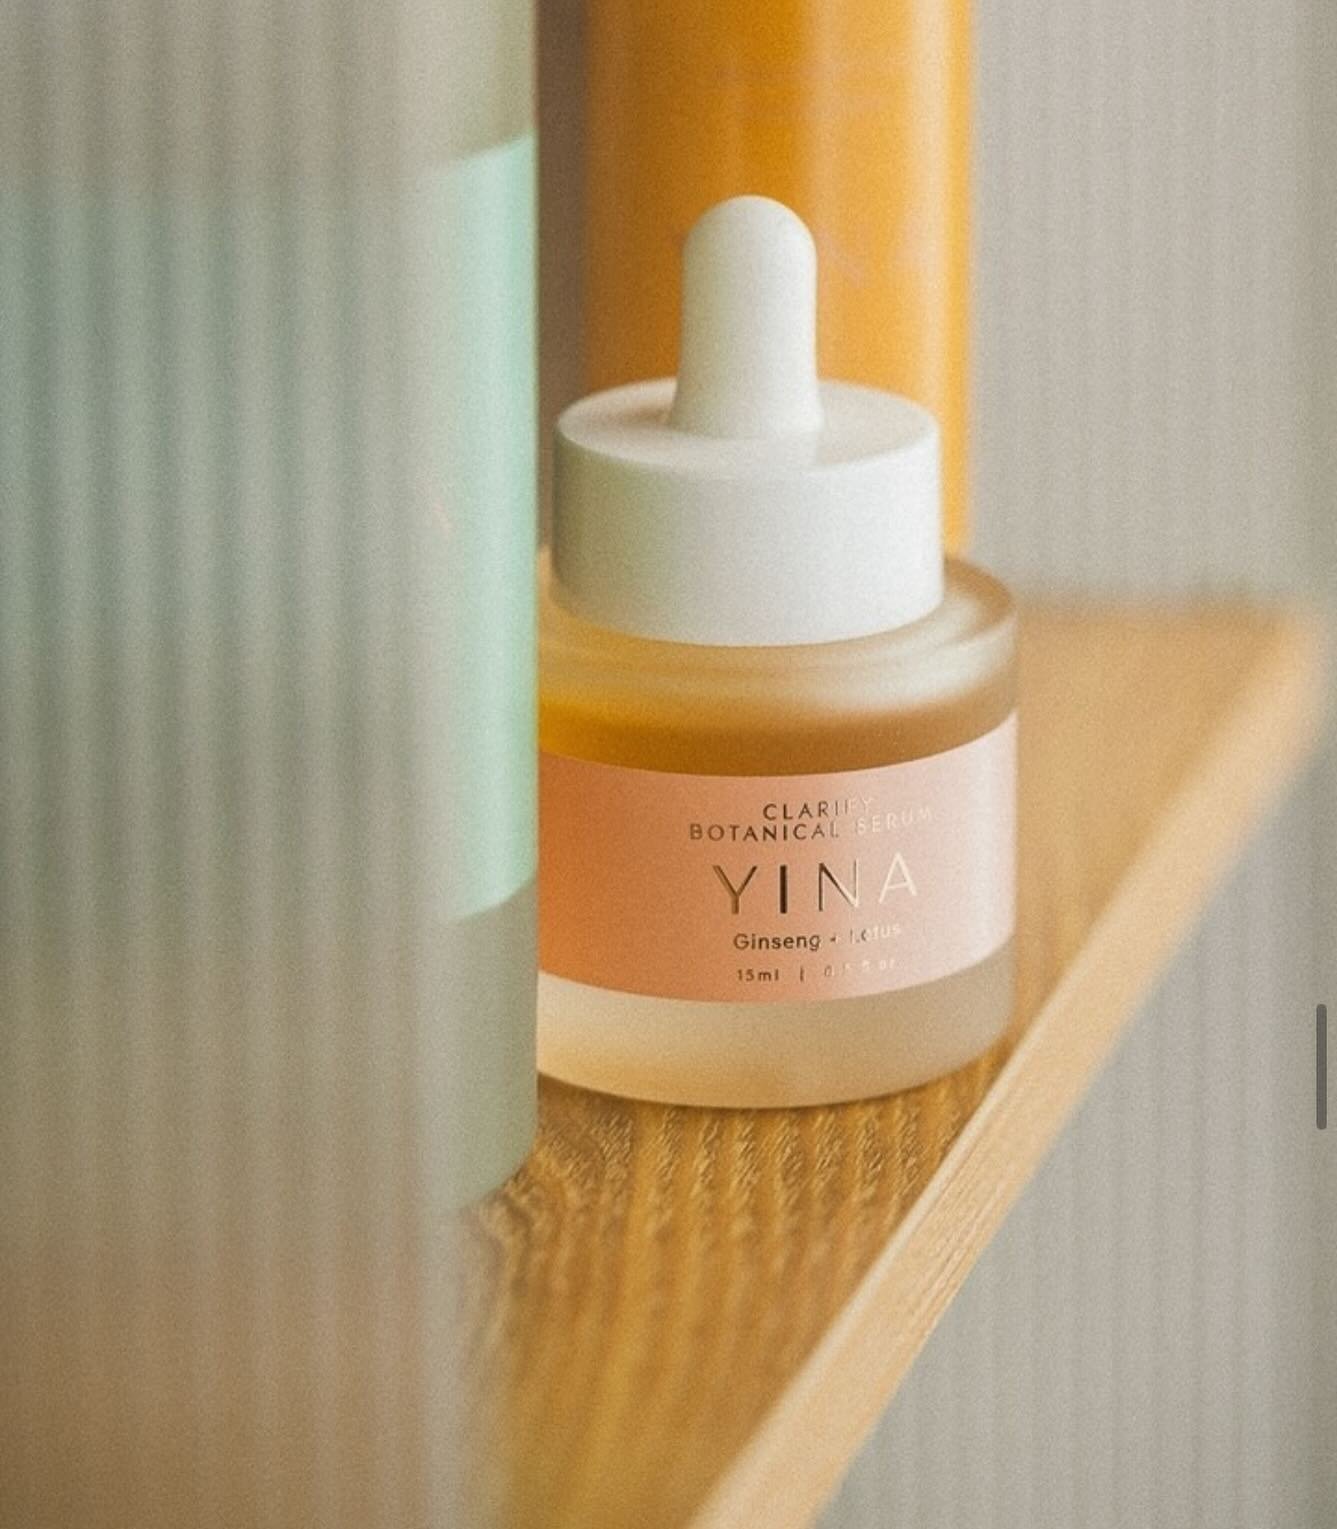 Brand highlight: YINA🪷

This beauty product brand is what TCM dreams are made of✨ Inspired and rooted in Chinese Medicine, Yina products embody modern wellness rituals rooted in traditional wisdom. Absolute luxury when you feel and smell the delicat